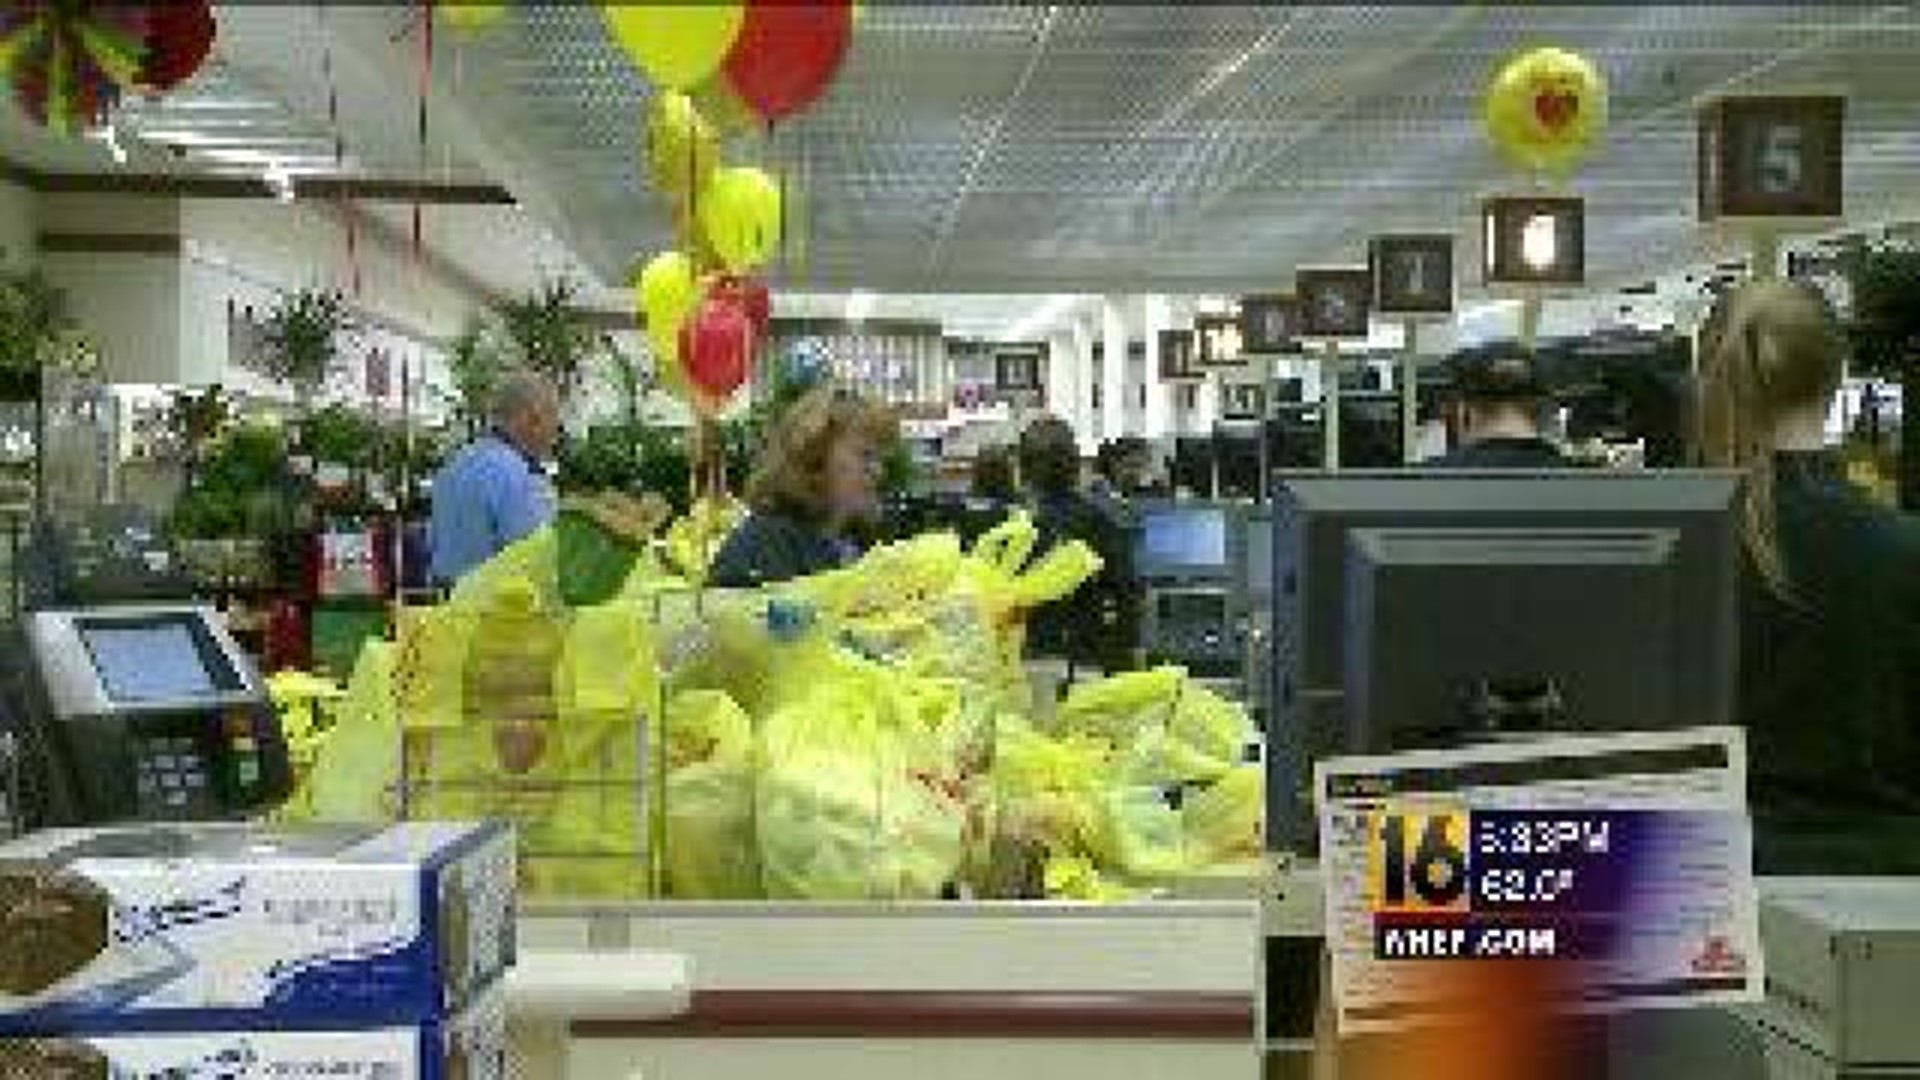 Bagging To Fight Hunger